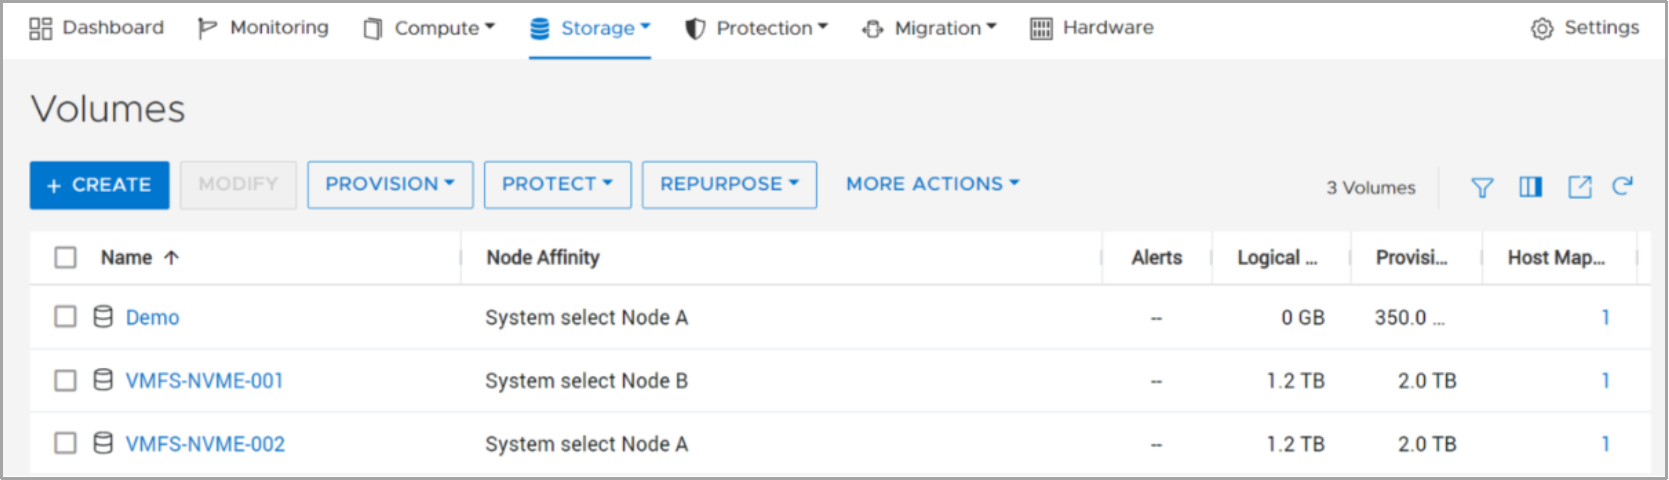 This figure shows the Node Affinity column for volumes in PowerStore Manager. 